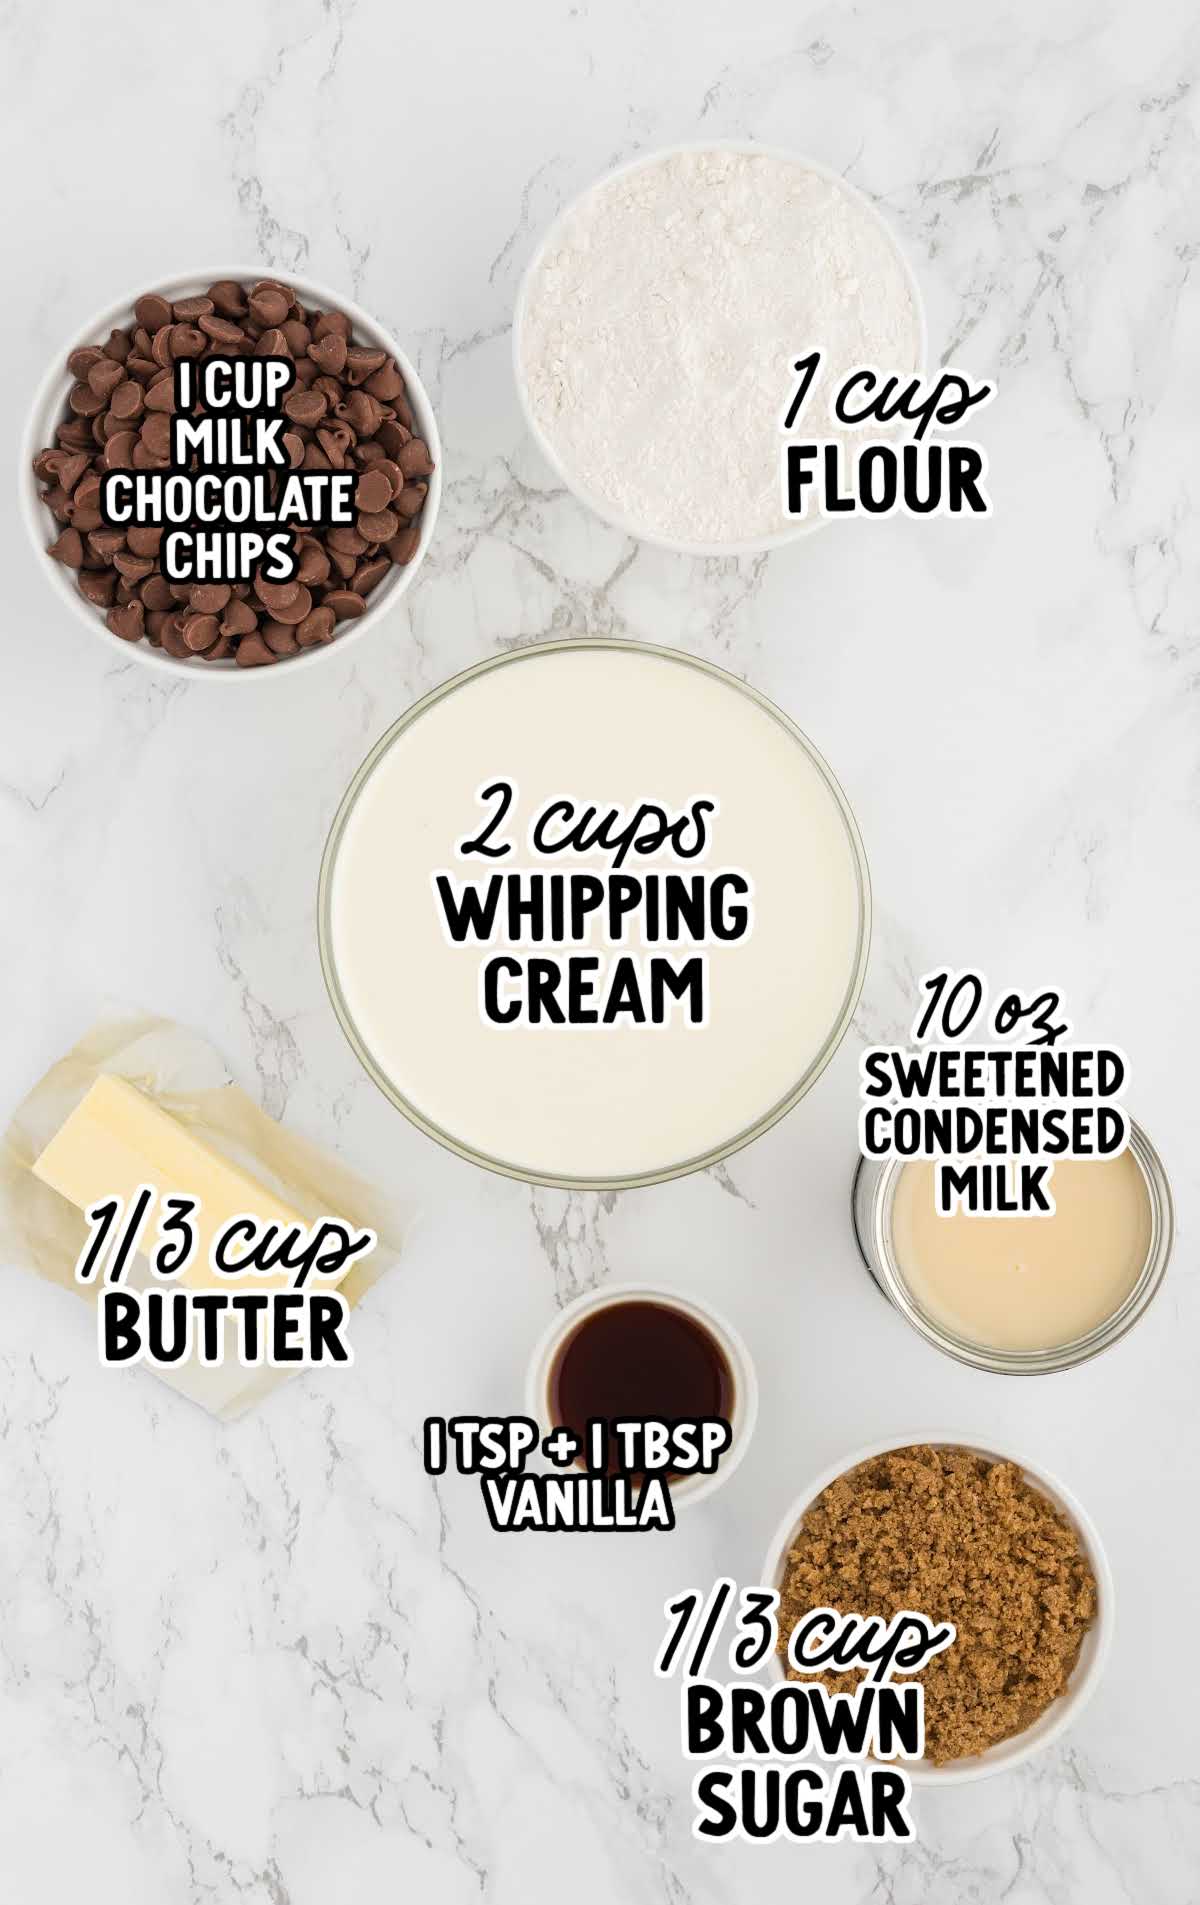 Cookie Dough Ice Cream raw ingredients that are labeled